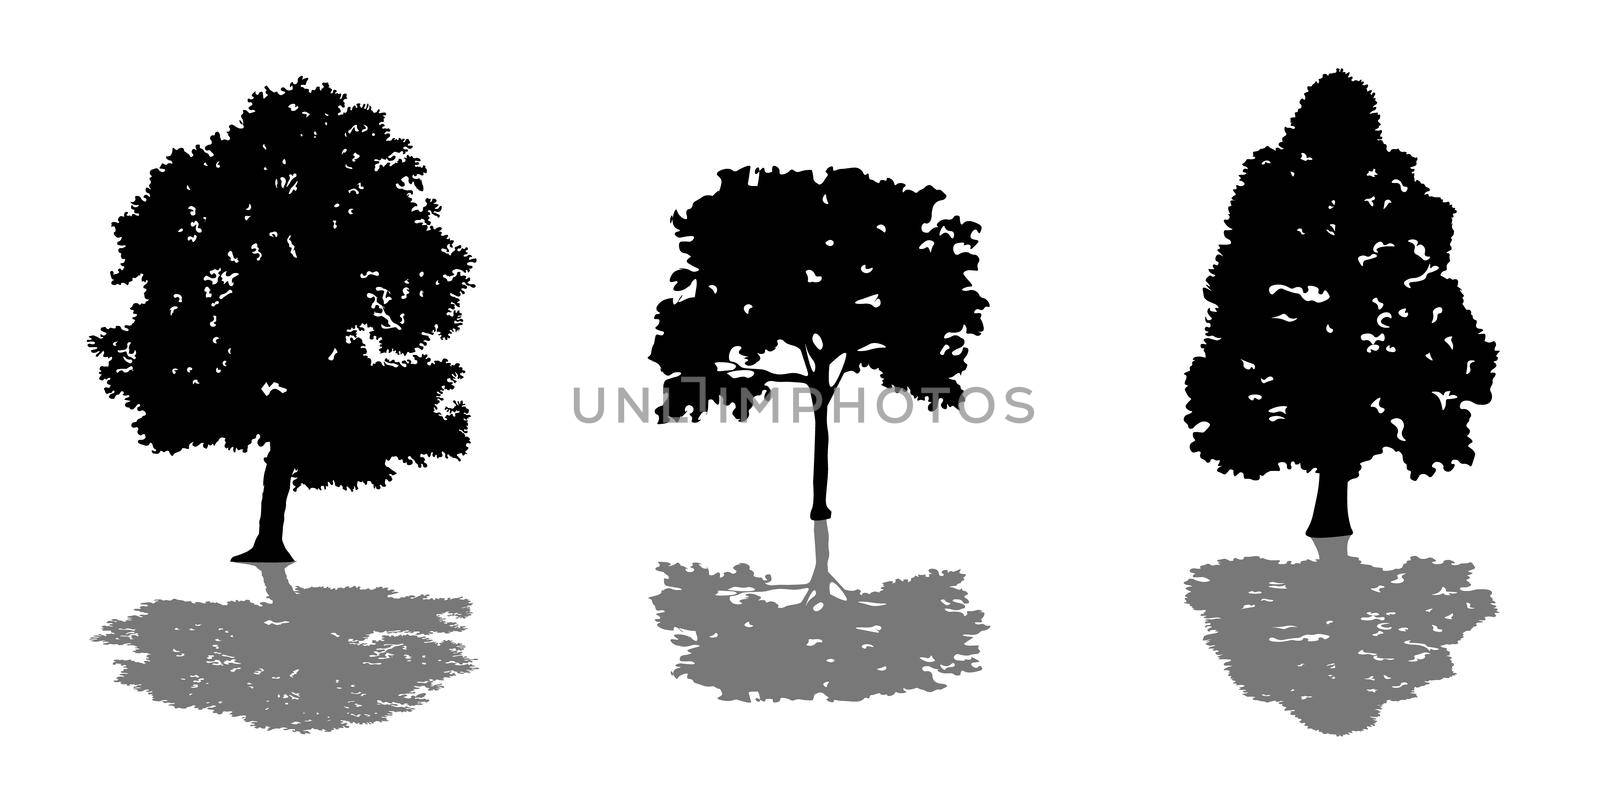 Tree set of black silhouettes with shadow by Alxyzt